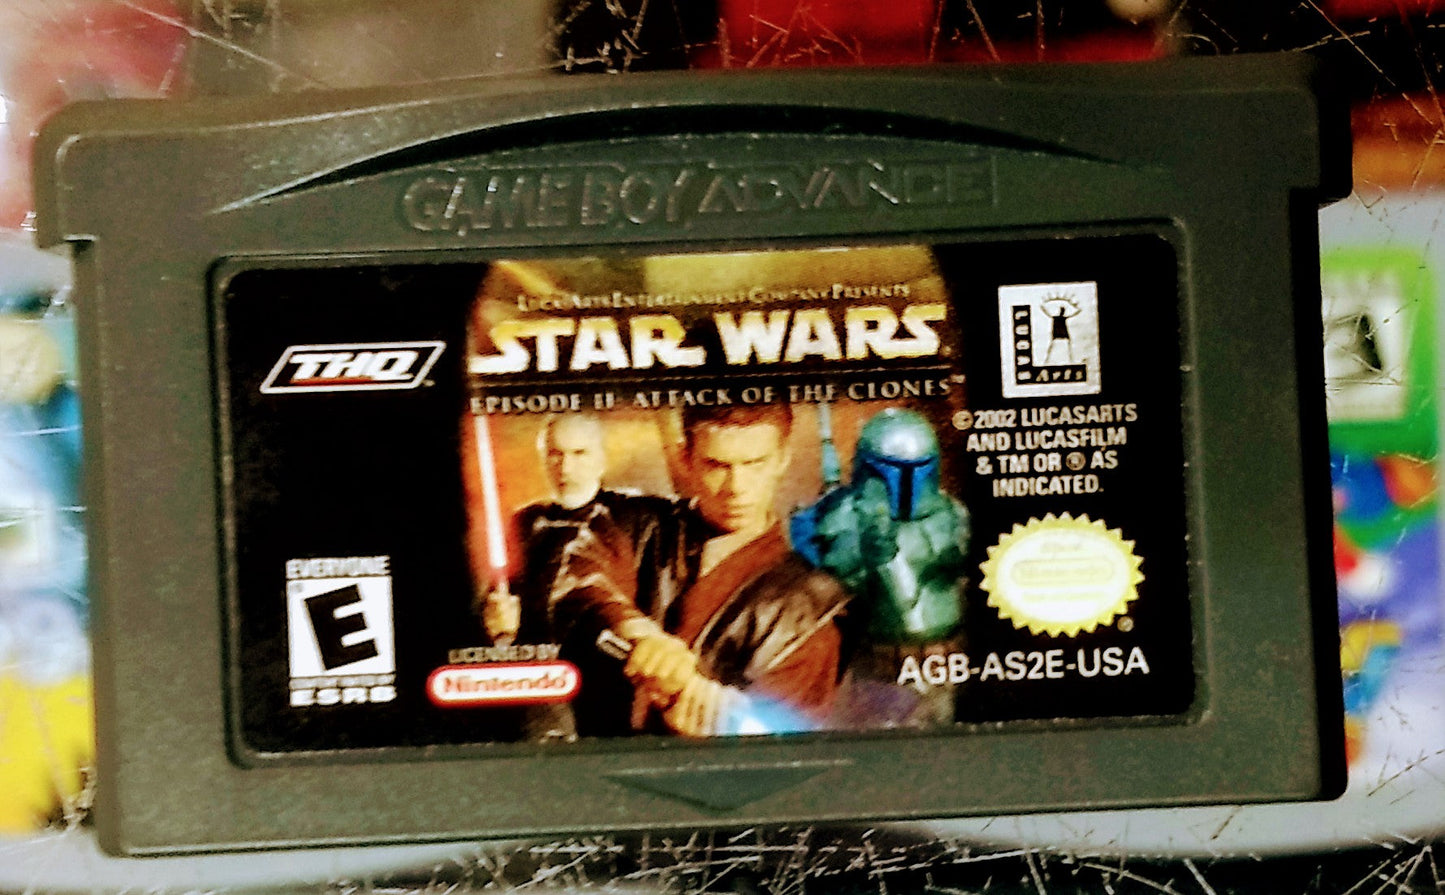 STAR WARS EPISODE II 2 ATTACK OF THE CLONES (GAME BOY ADVANCE GBA)